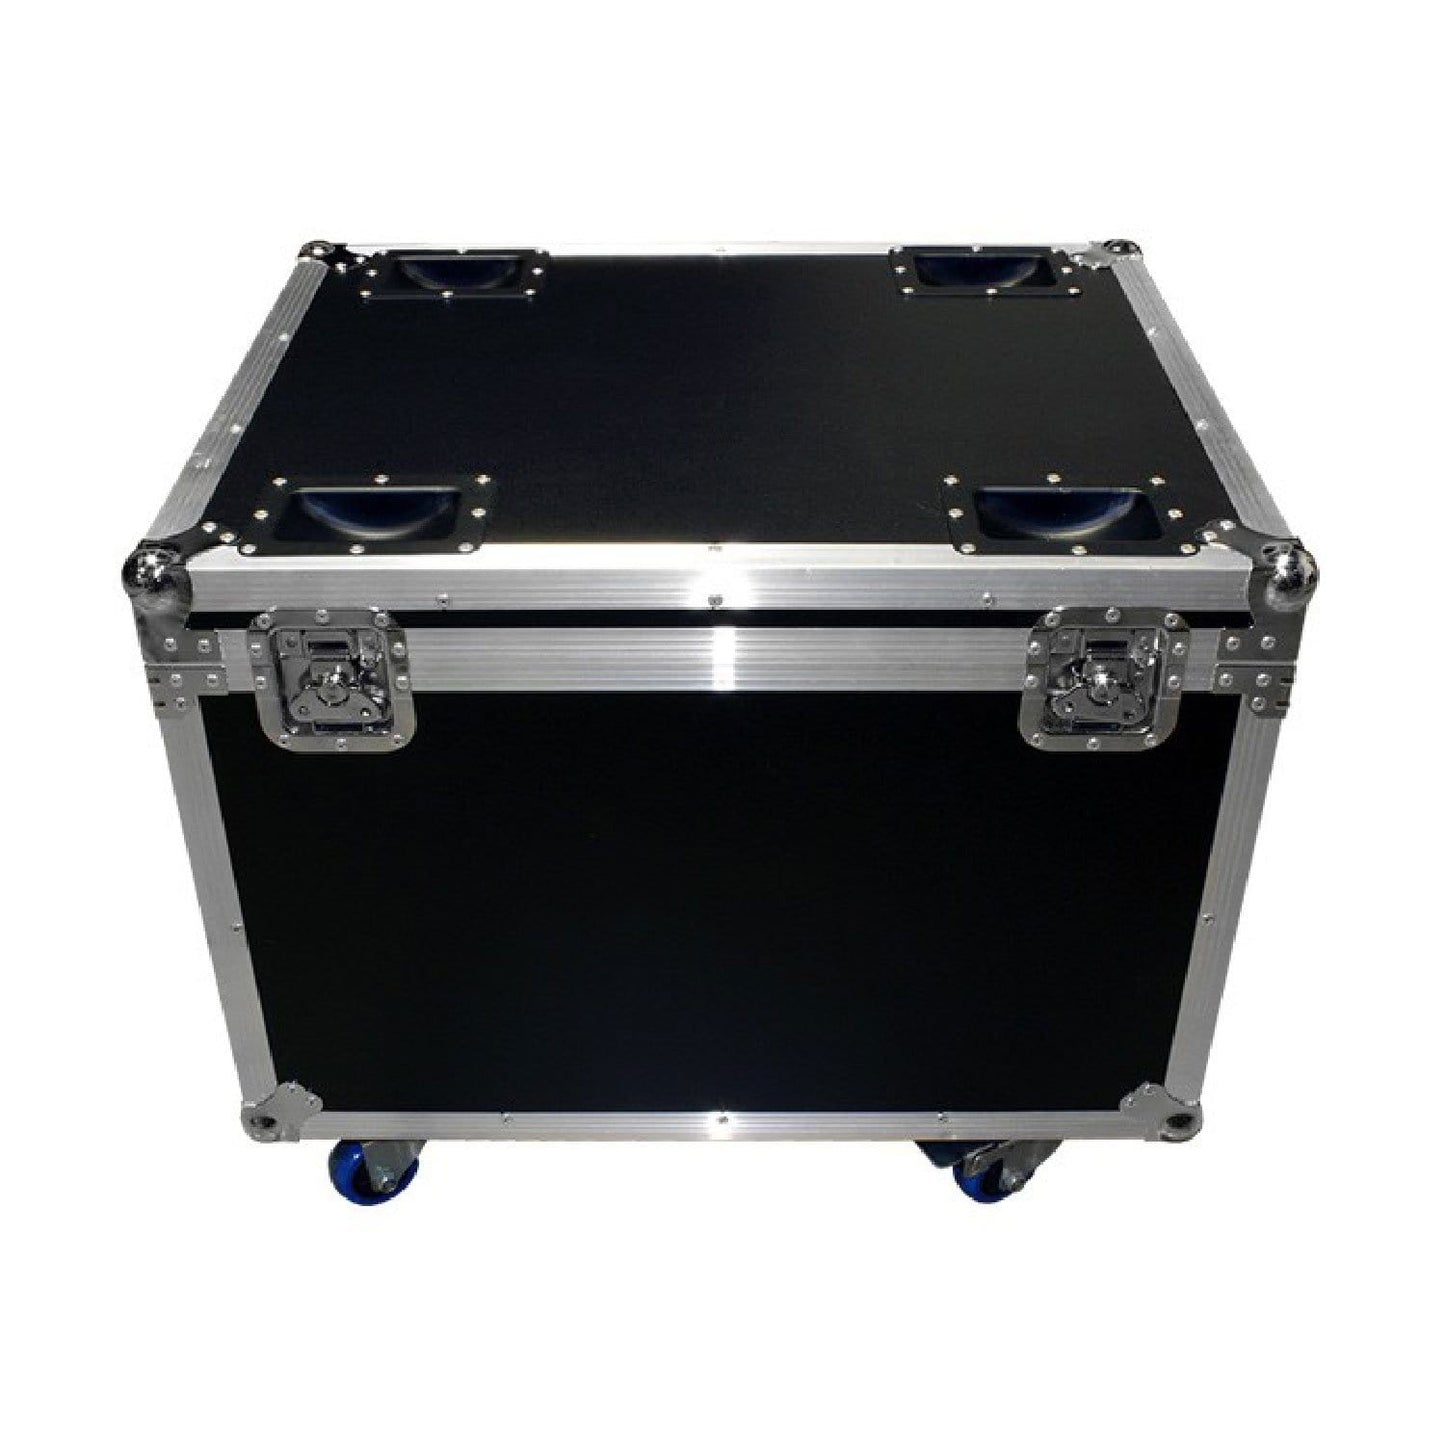 Blizzard Case Blade Quad Holds 4 Blade Fixtures - ProSound and Stage Lighting